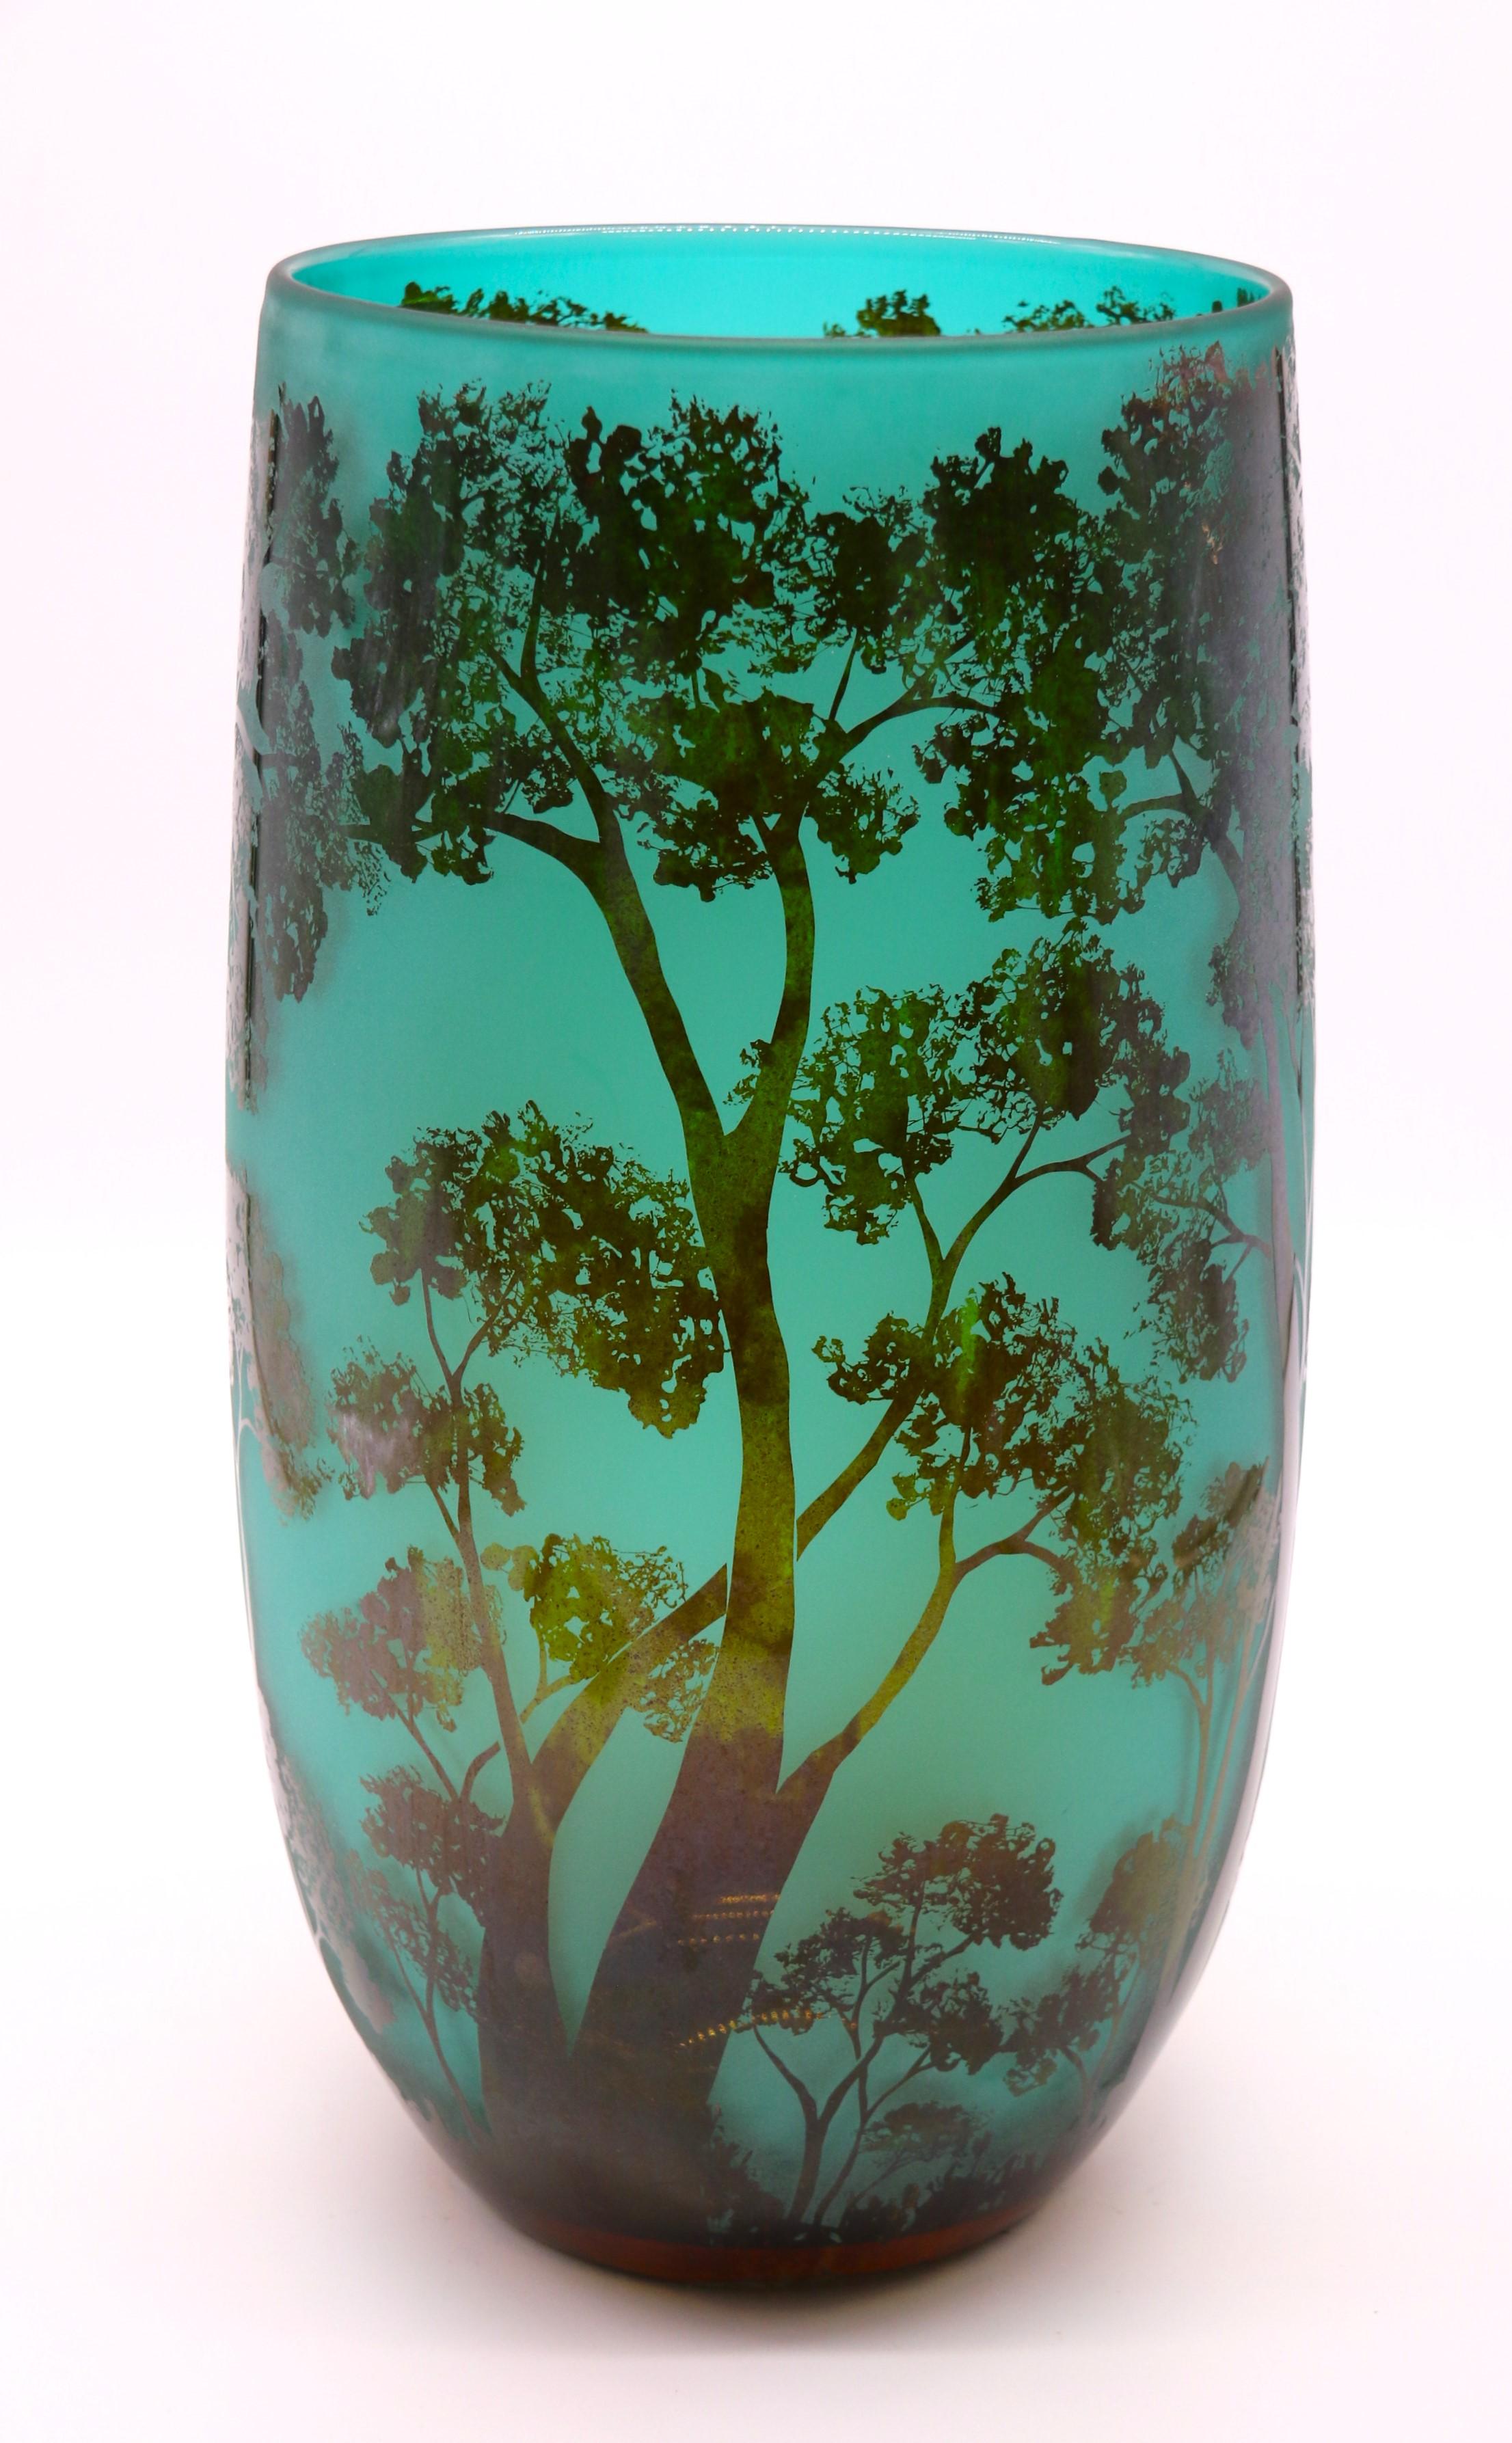 This most strikingly beautiful glass vase is a very large example which would have taken great skill to produce. It is made in two layers of glass. The inner, a most unusual shade of soft blue/turquoise glass overlaid with a mottled rich bronze